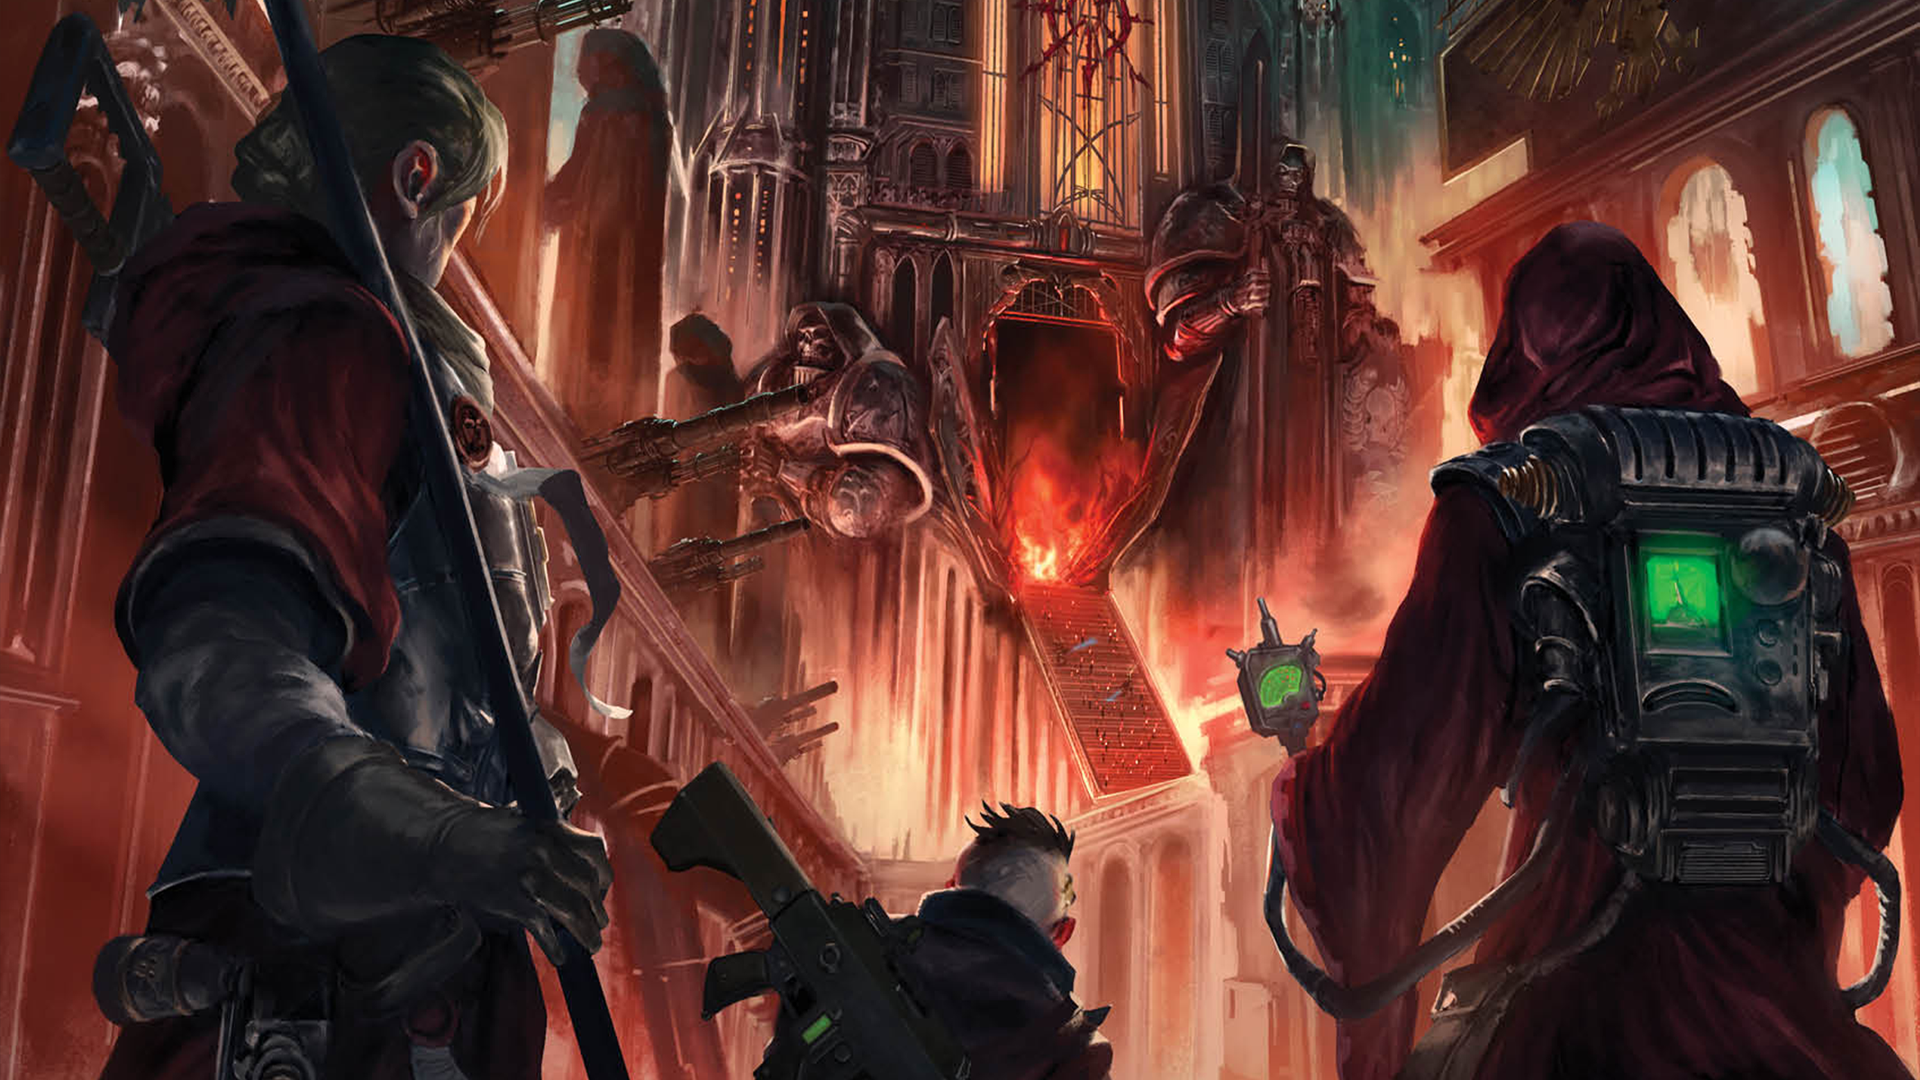 Image for Warhammer 40,000 RPG Imperium Maledictum reveals its cover art - exclusive